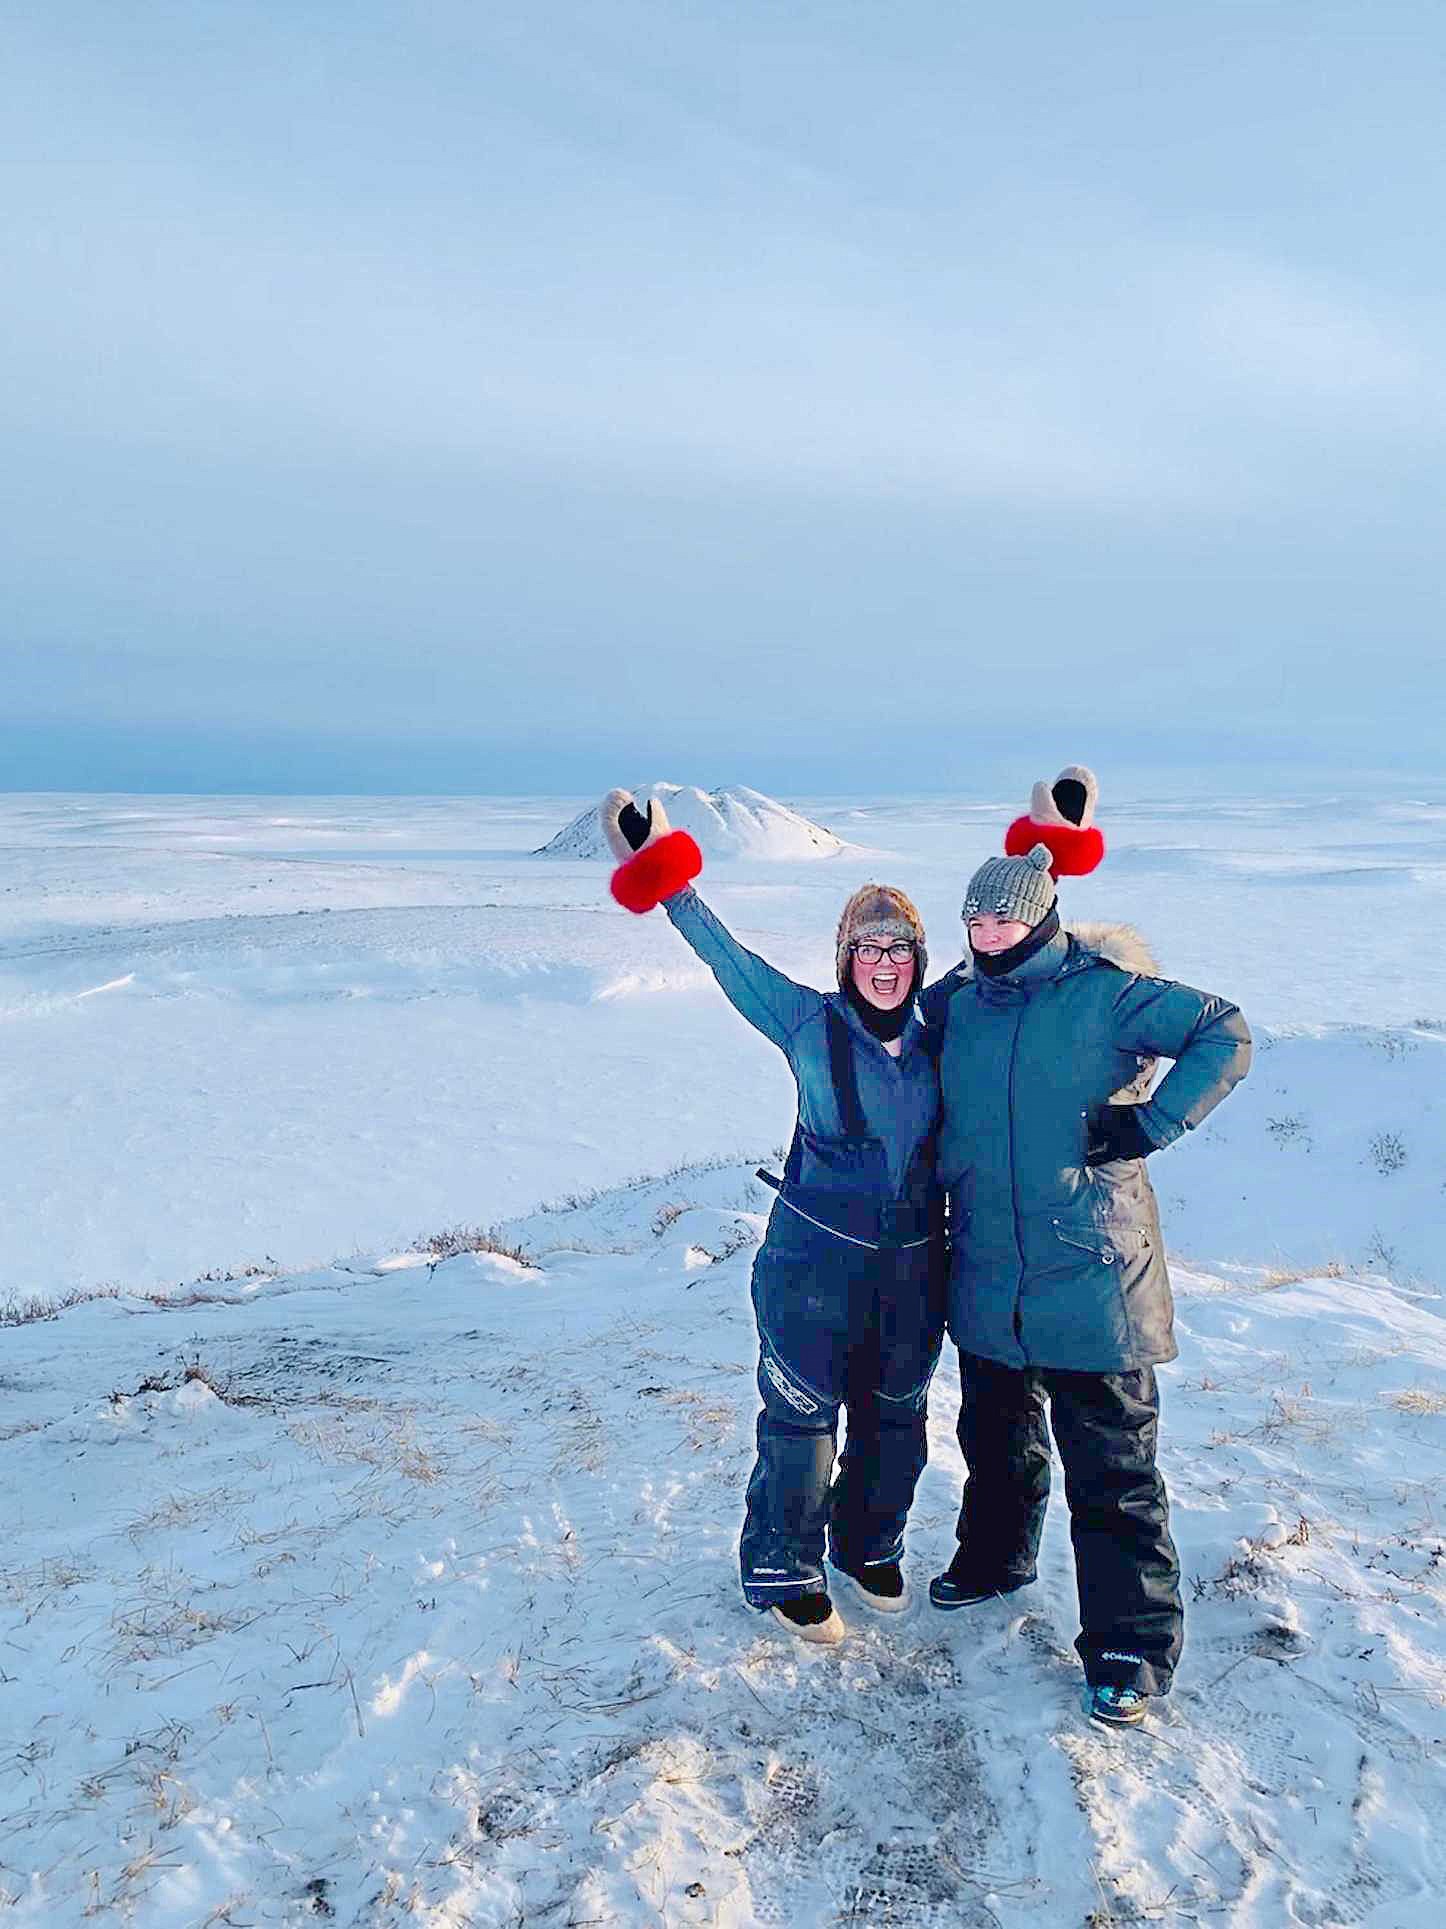 Senator Anderson (left) and Mélanie Donoghue, her former executive assistant, on the Pingo Canadian Landmark in Tuktoyaktuk, Northwest Territories, on March 11, 2019. (Photo credit: Office of Senator Dawn Anderson)